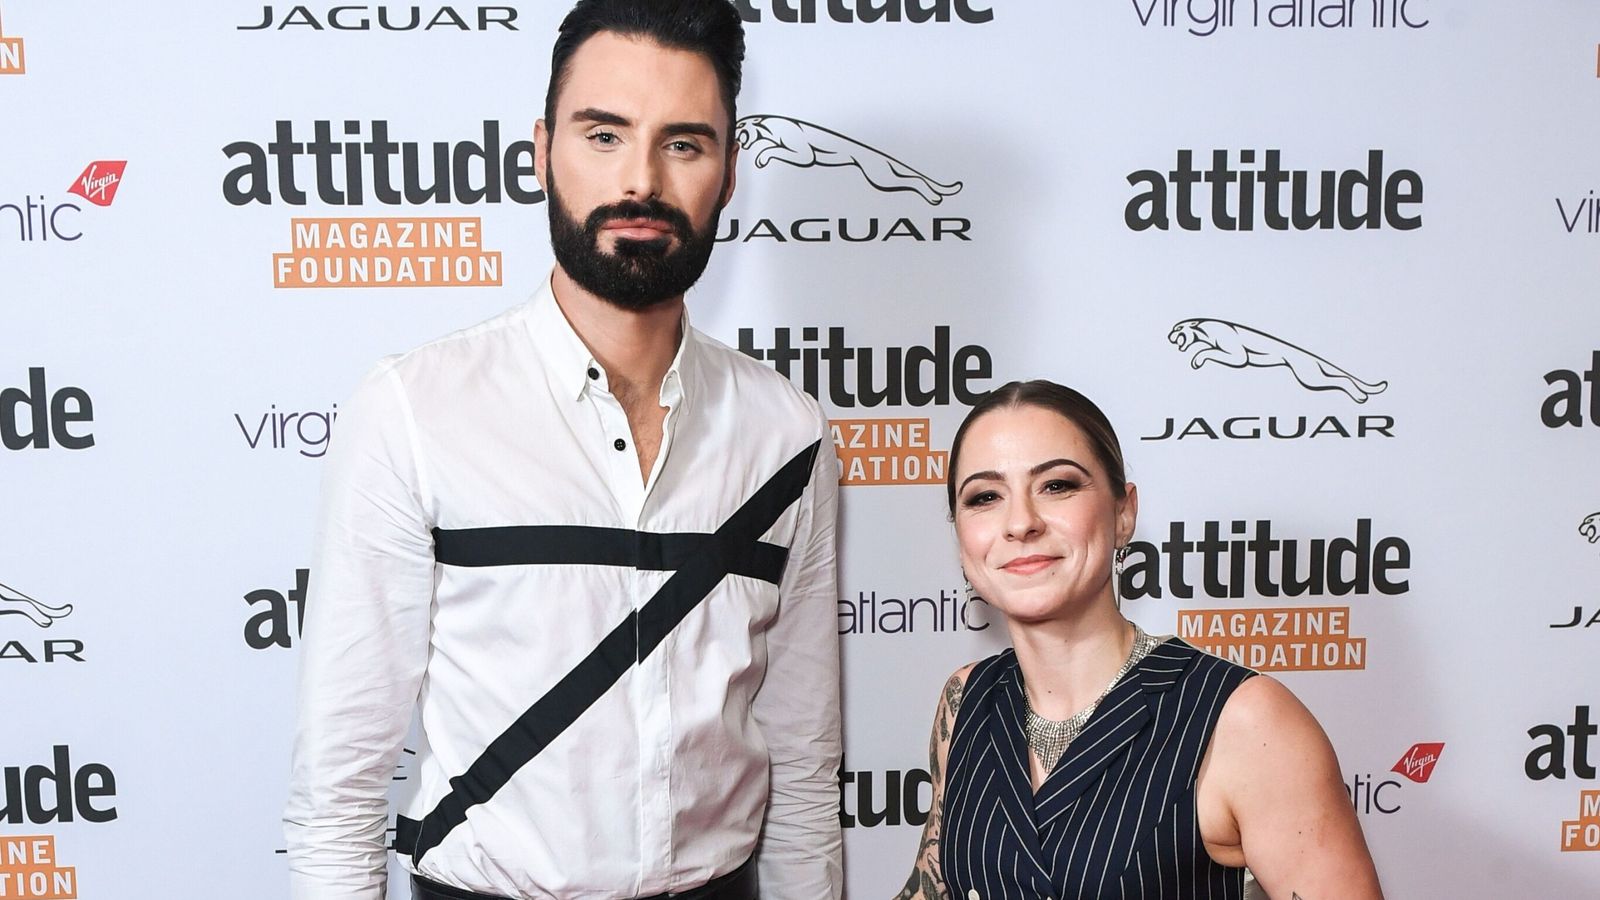 Rylan Clark opens up about 'horrendous' period after fellow X Factor star Lucy Spraggan was raped by hotel porter